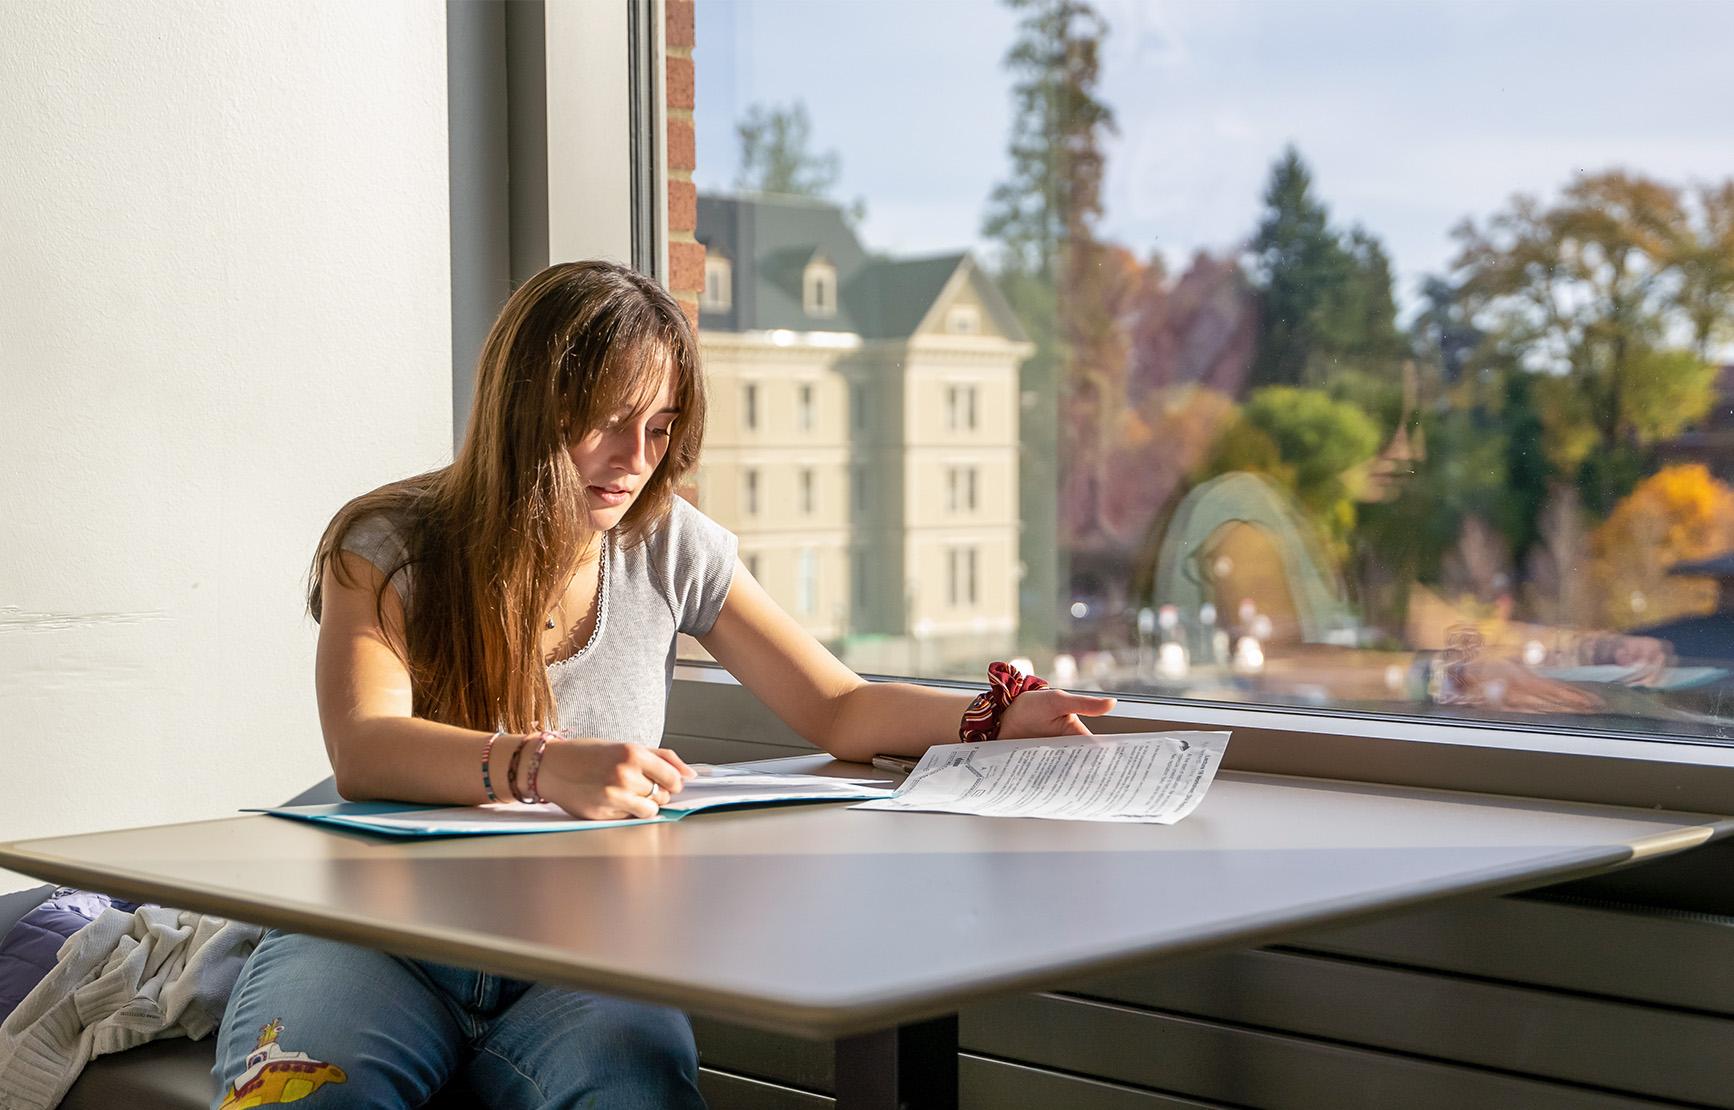 Student studying at table by window.